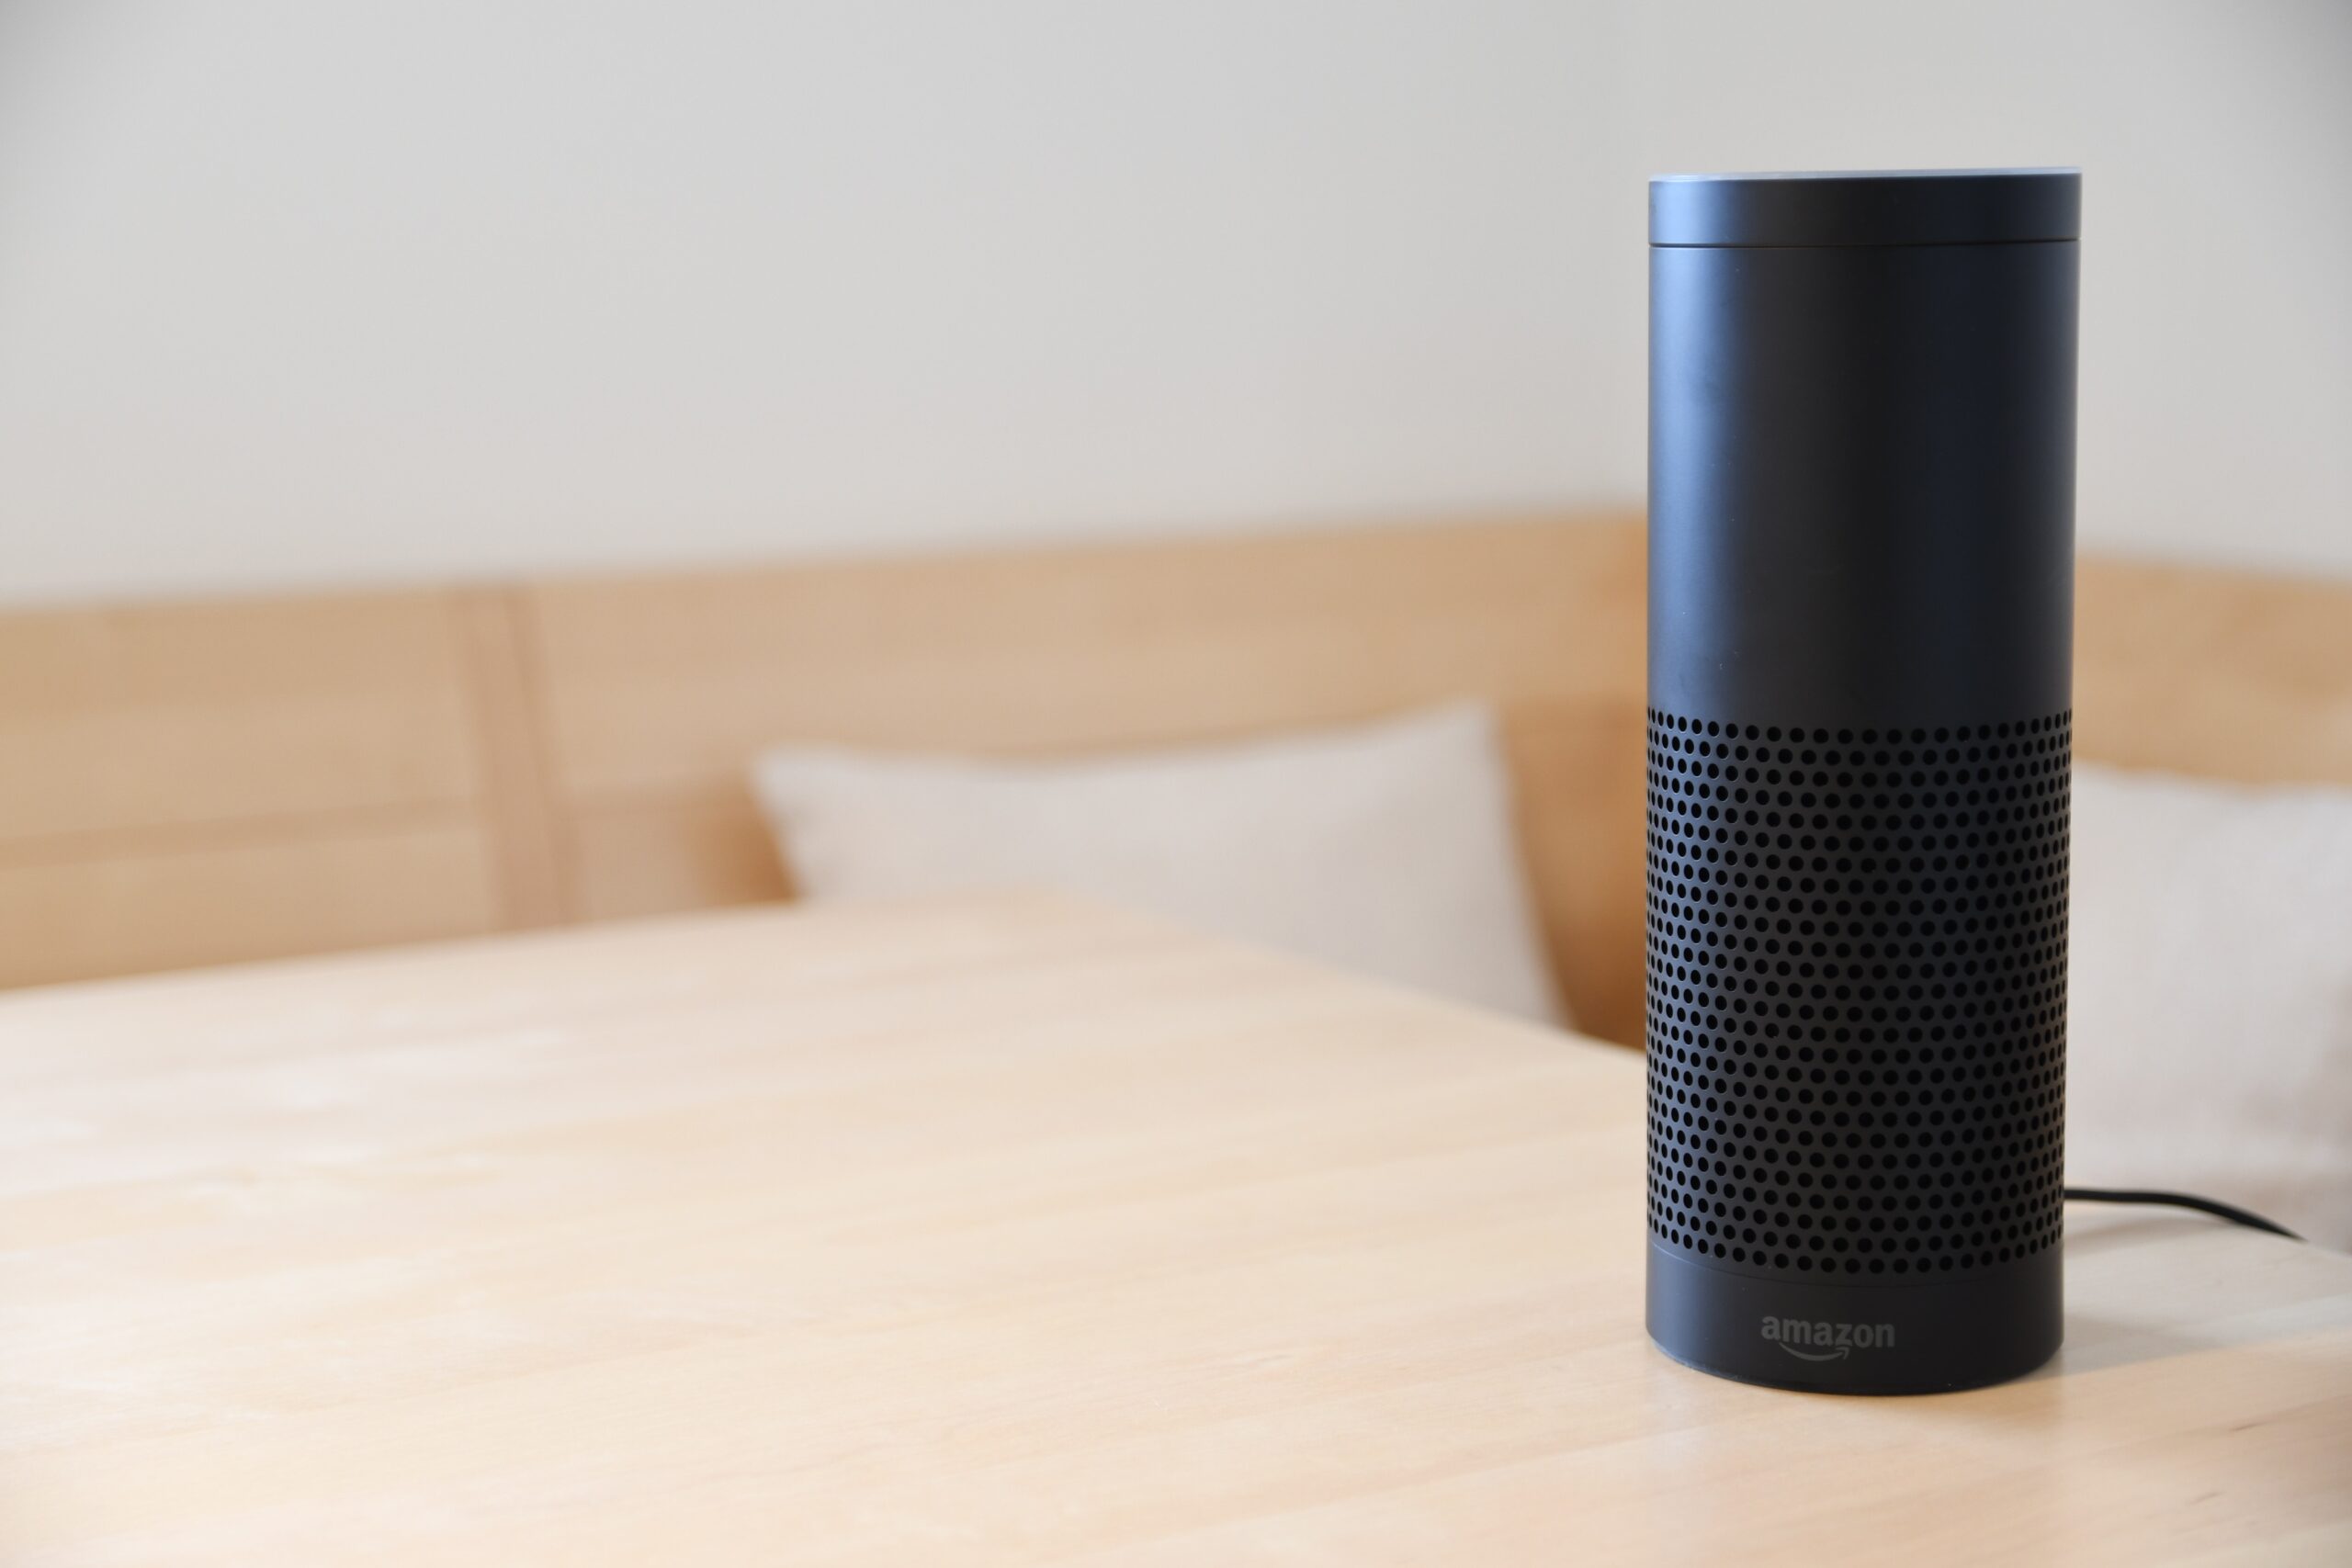 What Are The Uses Of Smart Speakers?